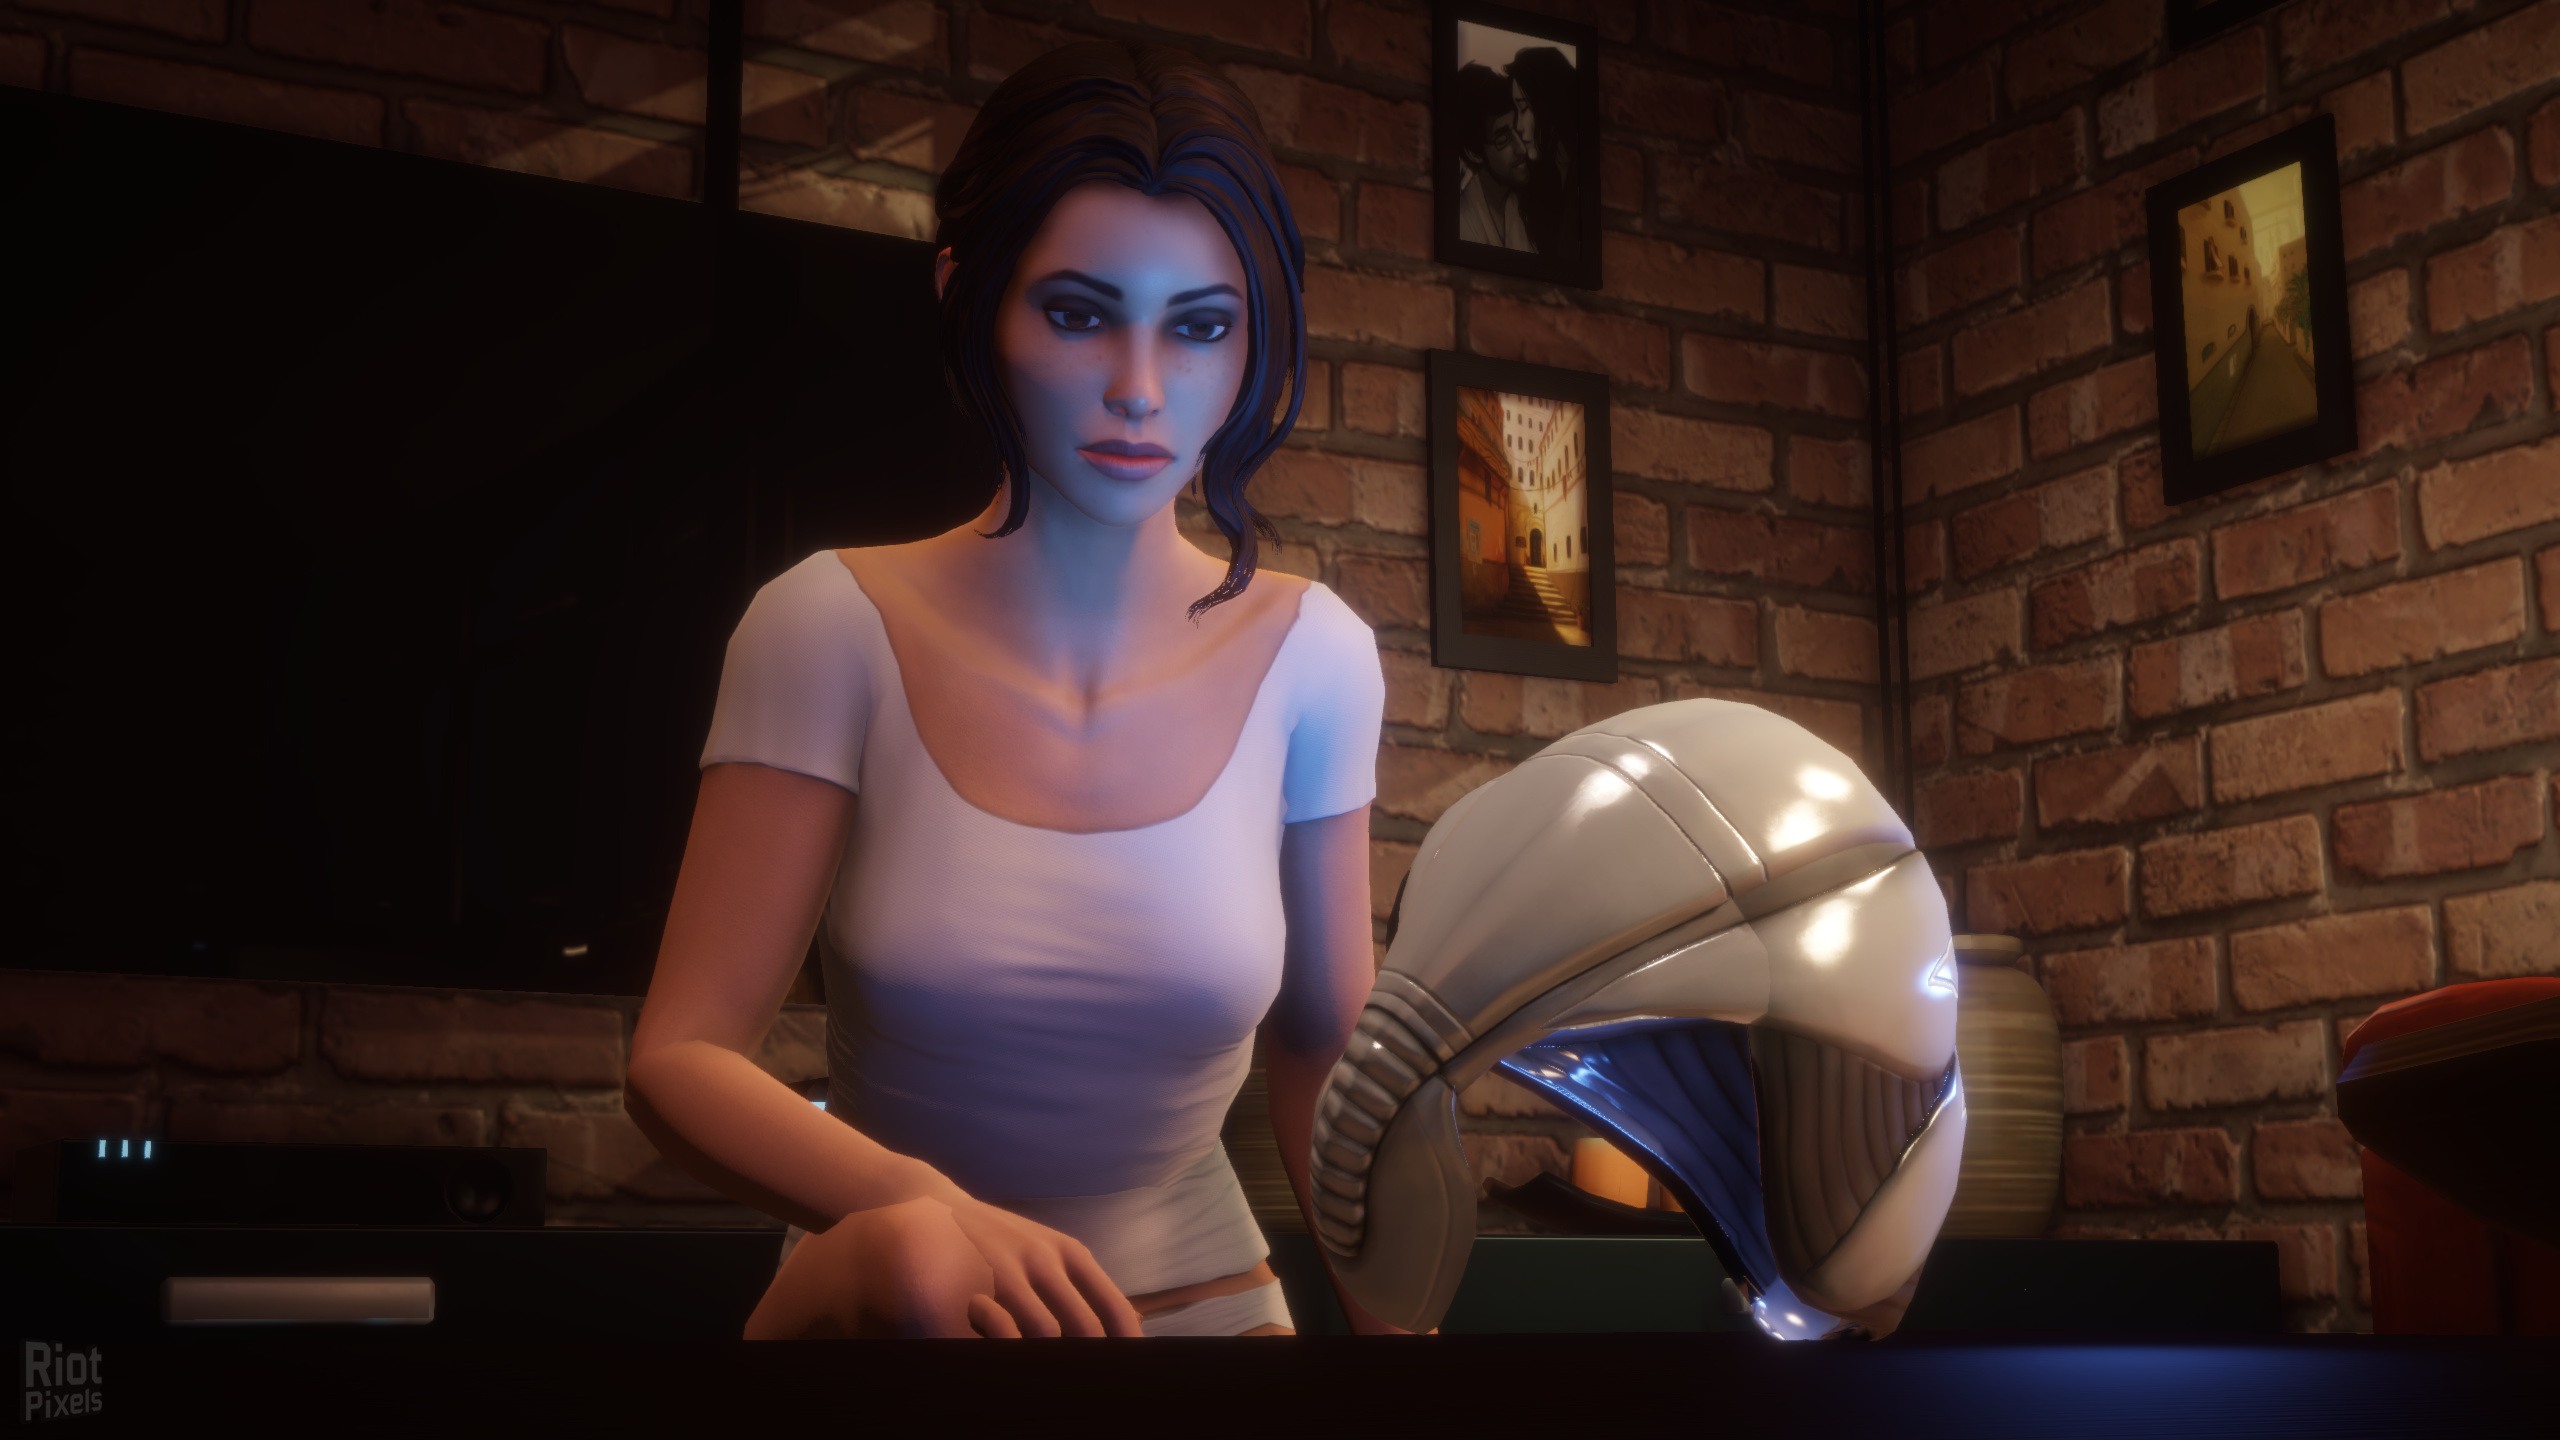 Dreamfall Chapters Game Screenshots At Riot Pixels Images